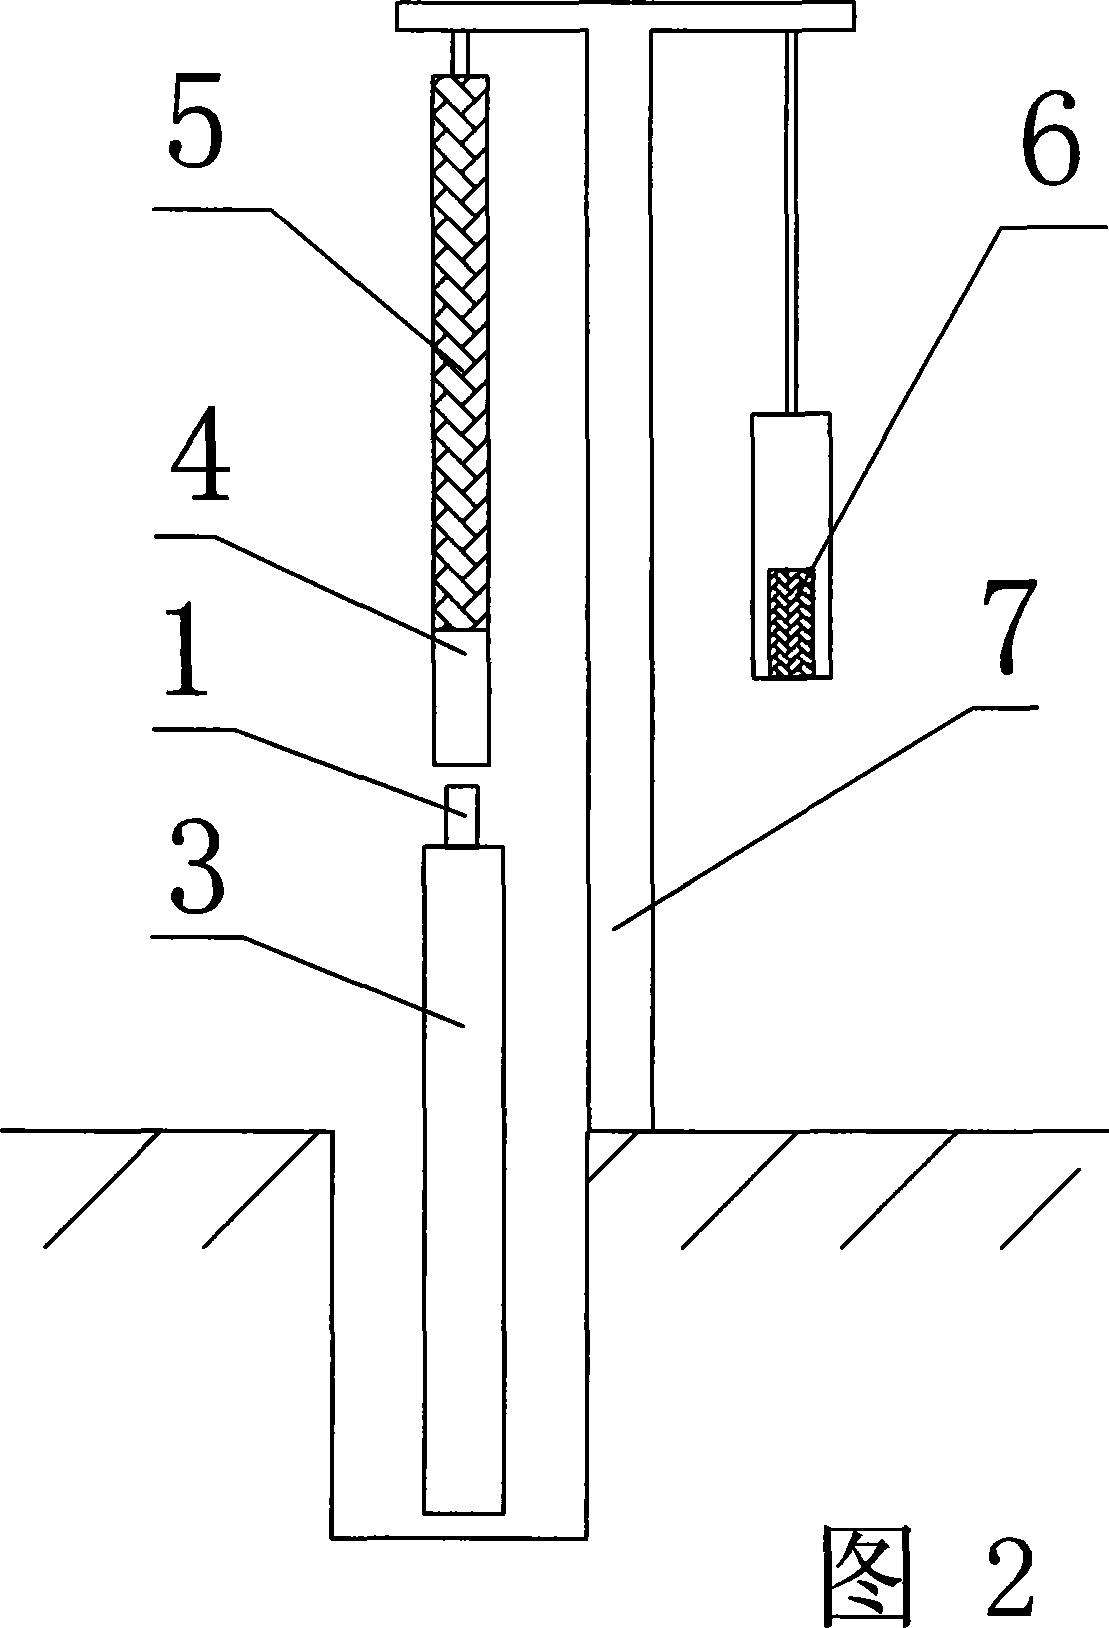 Method for automatically filling mineral insulated electric cable